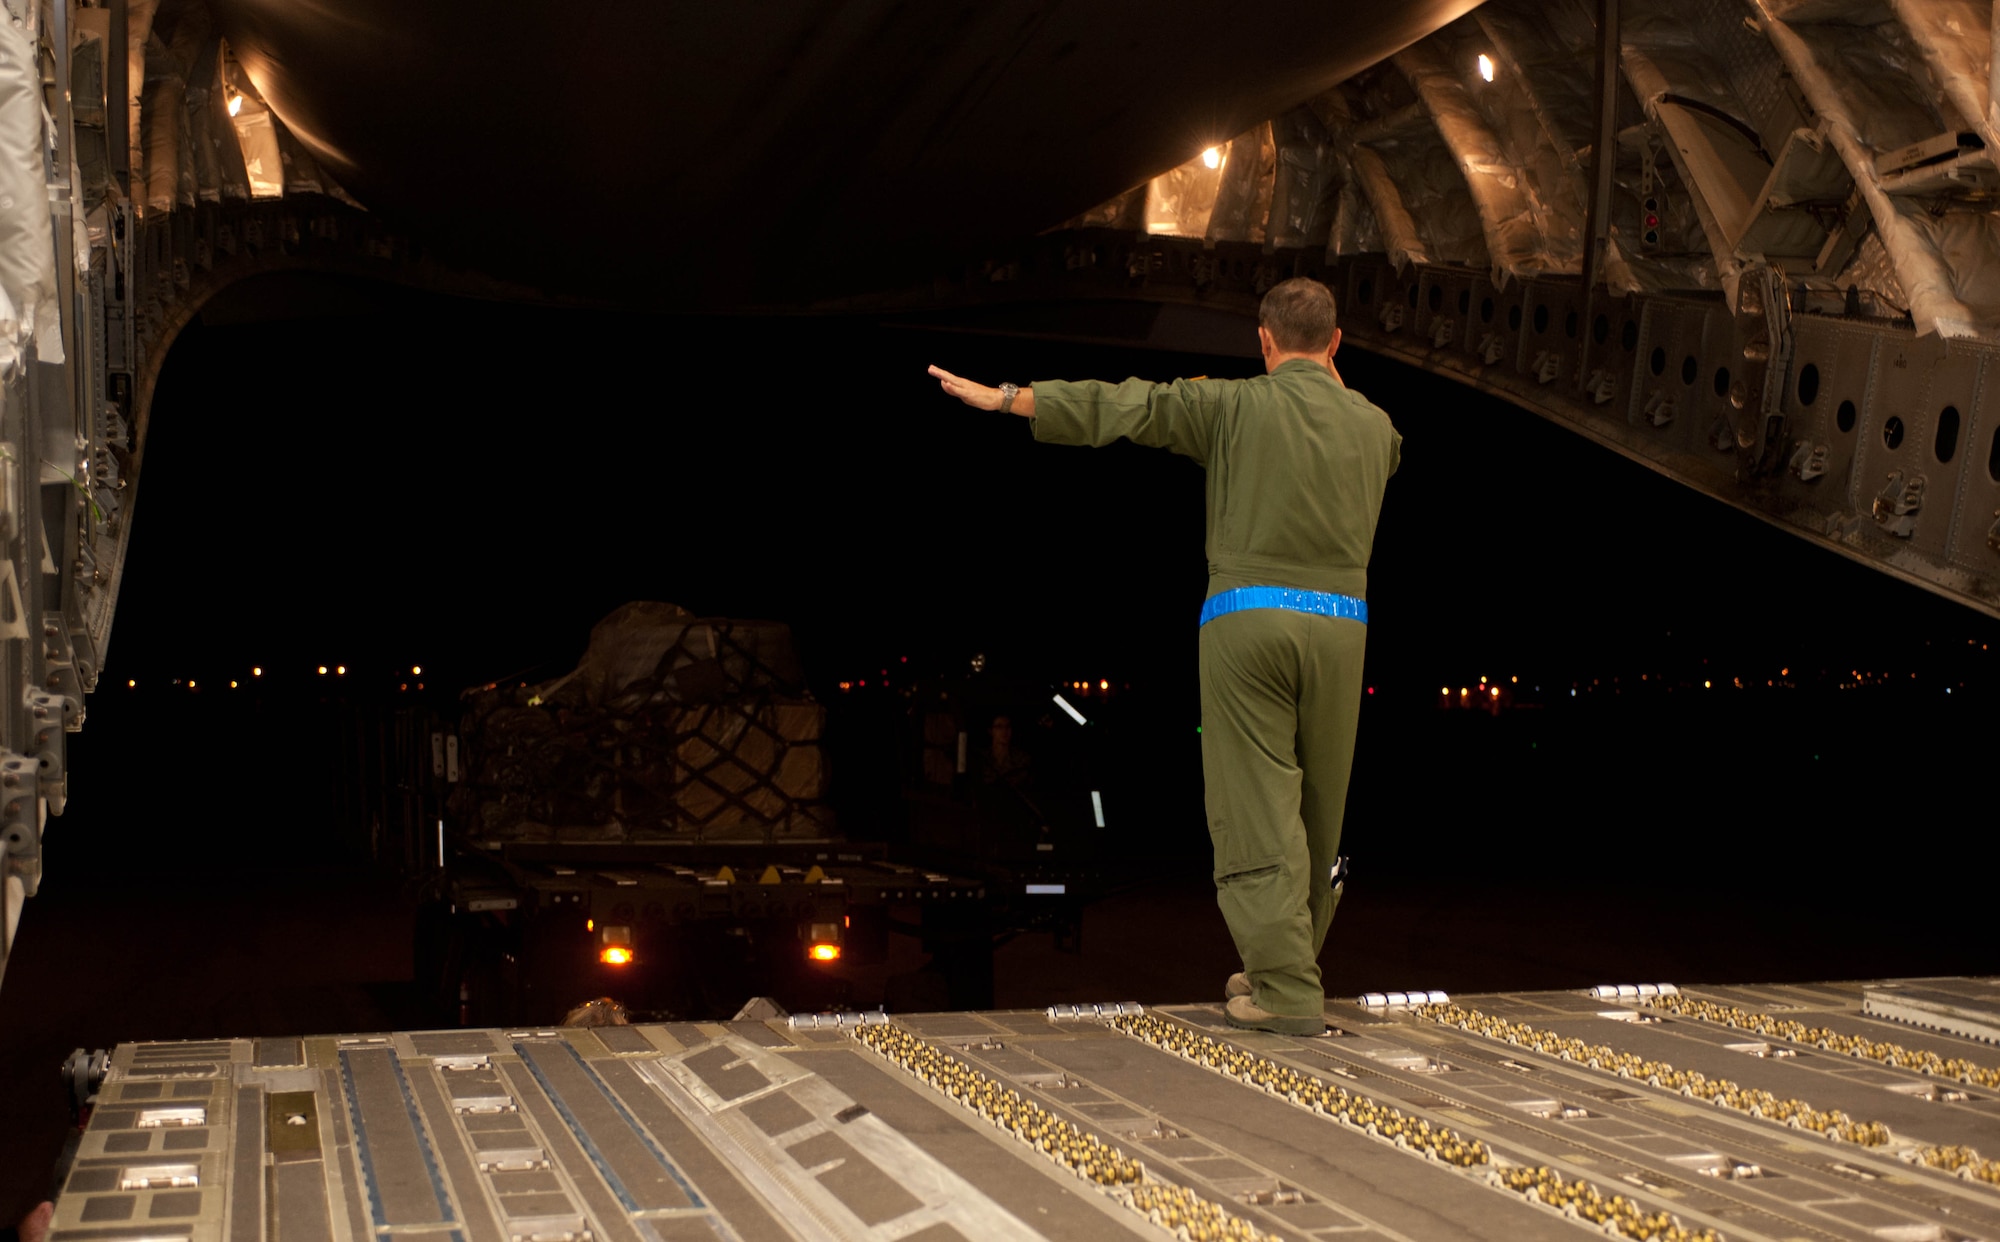 Master Sgt. Ron Dunn, 729th Airlift Support Squadron loadmaster, marshalls a load truck to unload equipment and supplies into a C-17 Globemaster at Ellsworth Air Force Base, S.D., Nov. 2, 2012. Working with the Federal Emergency Management Agency even before Hurricane Sandy hit, U.S. Air Force active duty, reserve and guard units began conducting round-the-clock operations to support relief efforts in New Jersey and New York. (U.S. Air Force photo by Airman 1st Class Zachary Hada/Released)